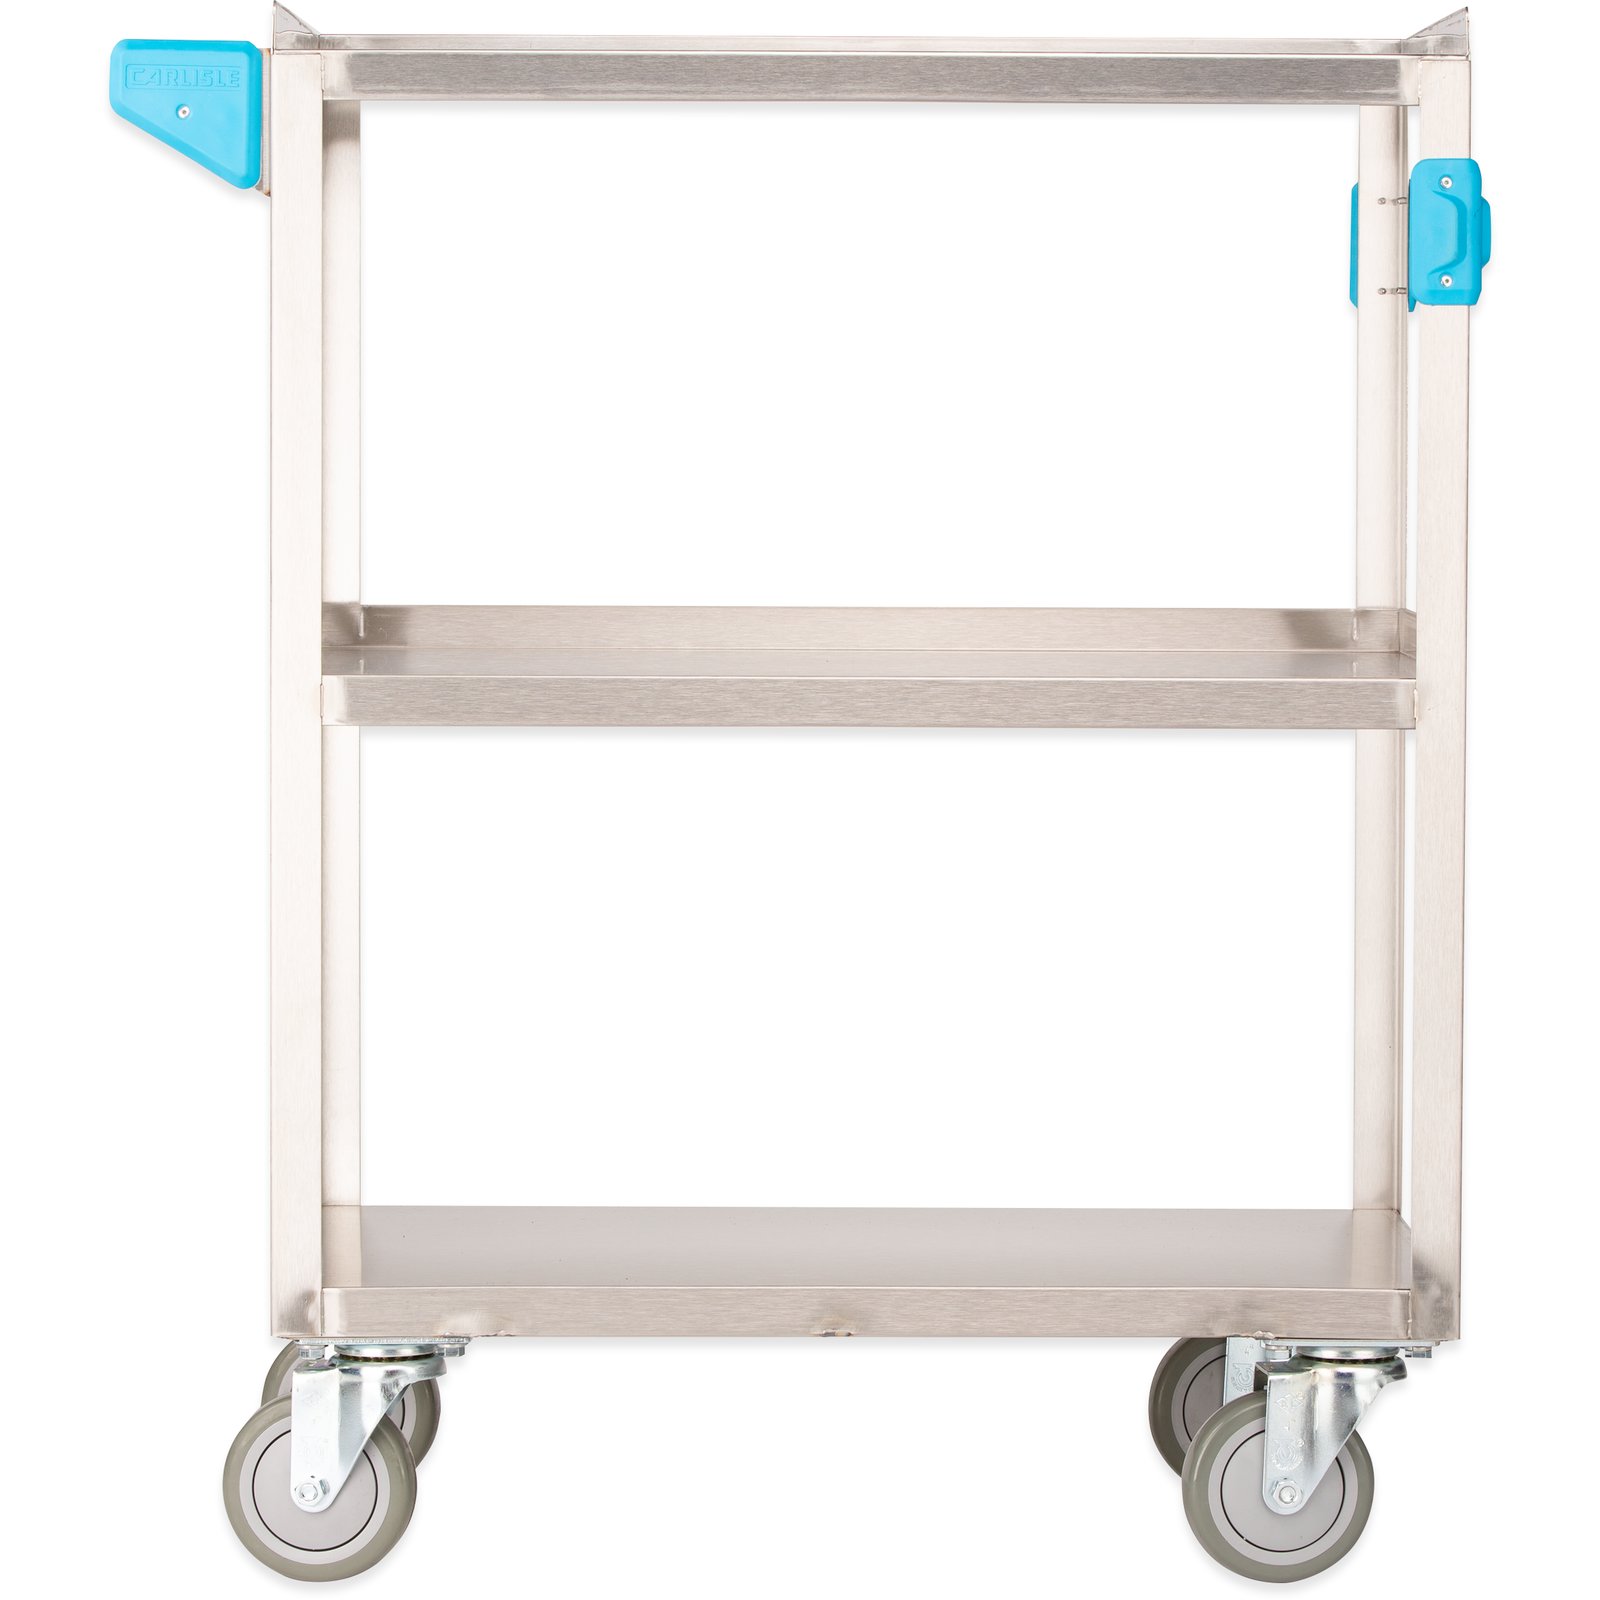 UC7032133 - Stainless Steel 3 Shelf Utility Cart 21 x 33 - Stainless  Steel